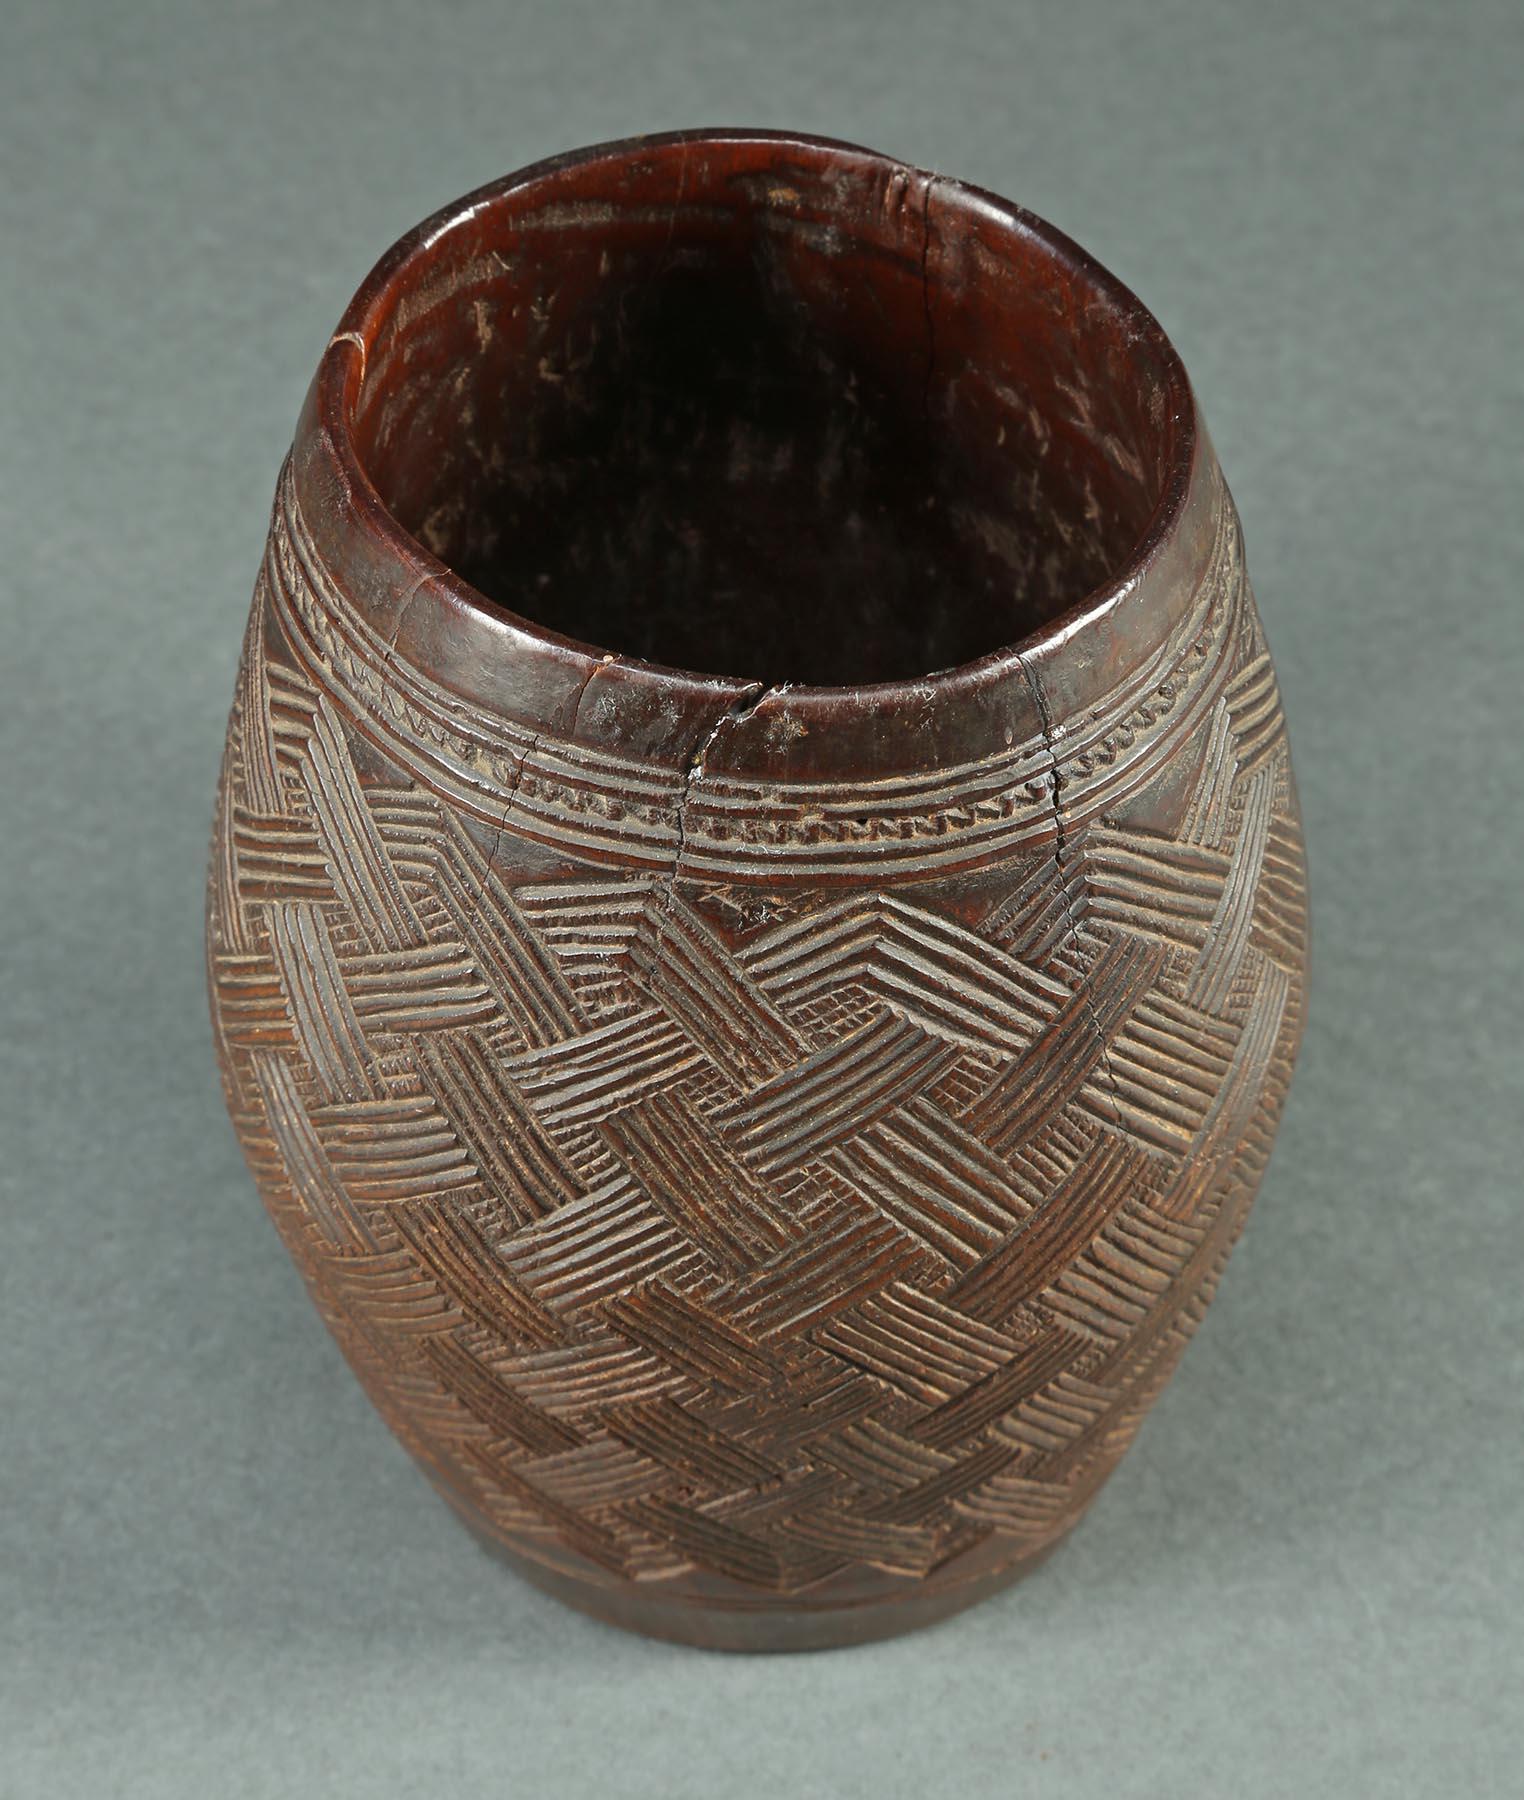 Kuba tribal African palm wine cup, great design, early 20th century

Early Kuba palm wine cup with great carved design similar to the famous Kuba cloth textiles. Fine worn patina, old stabile cracks, good age from use.